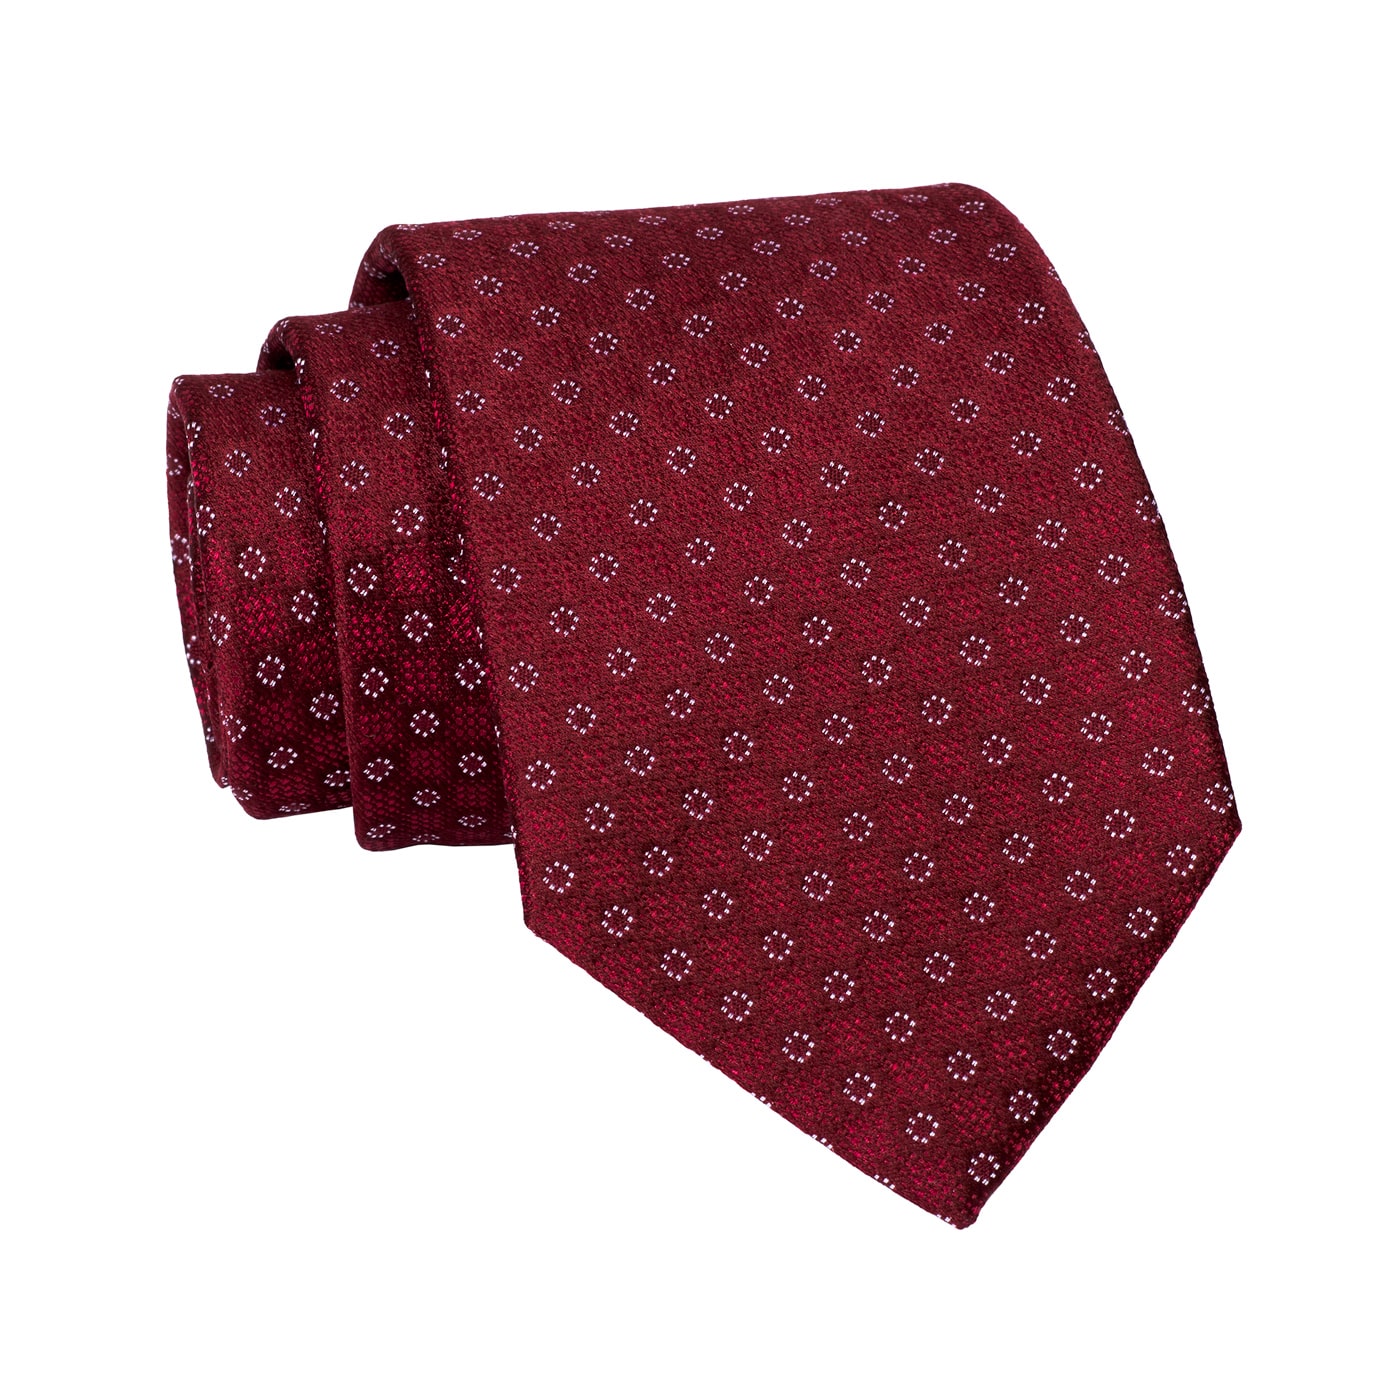 Lawrence Foulard Silk Tie, Red / Silver – The Dark Knot